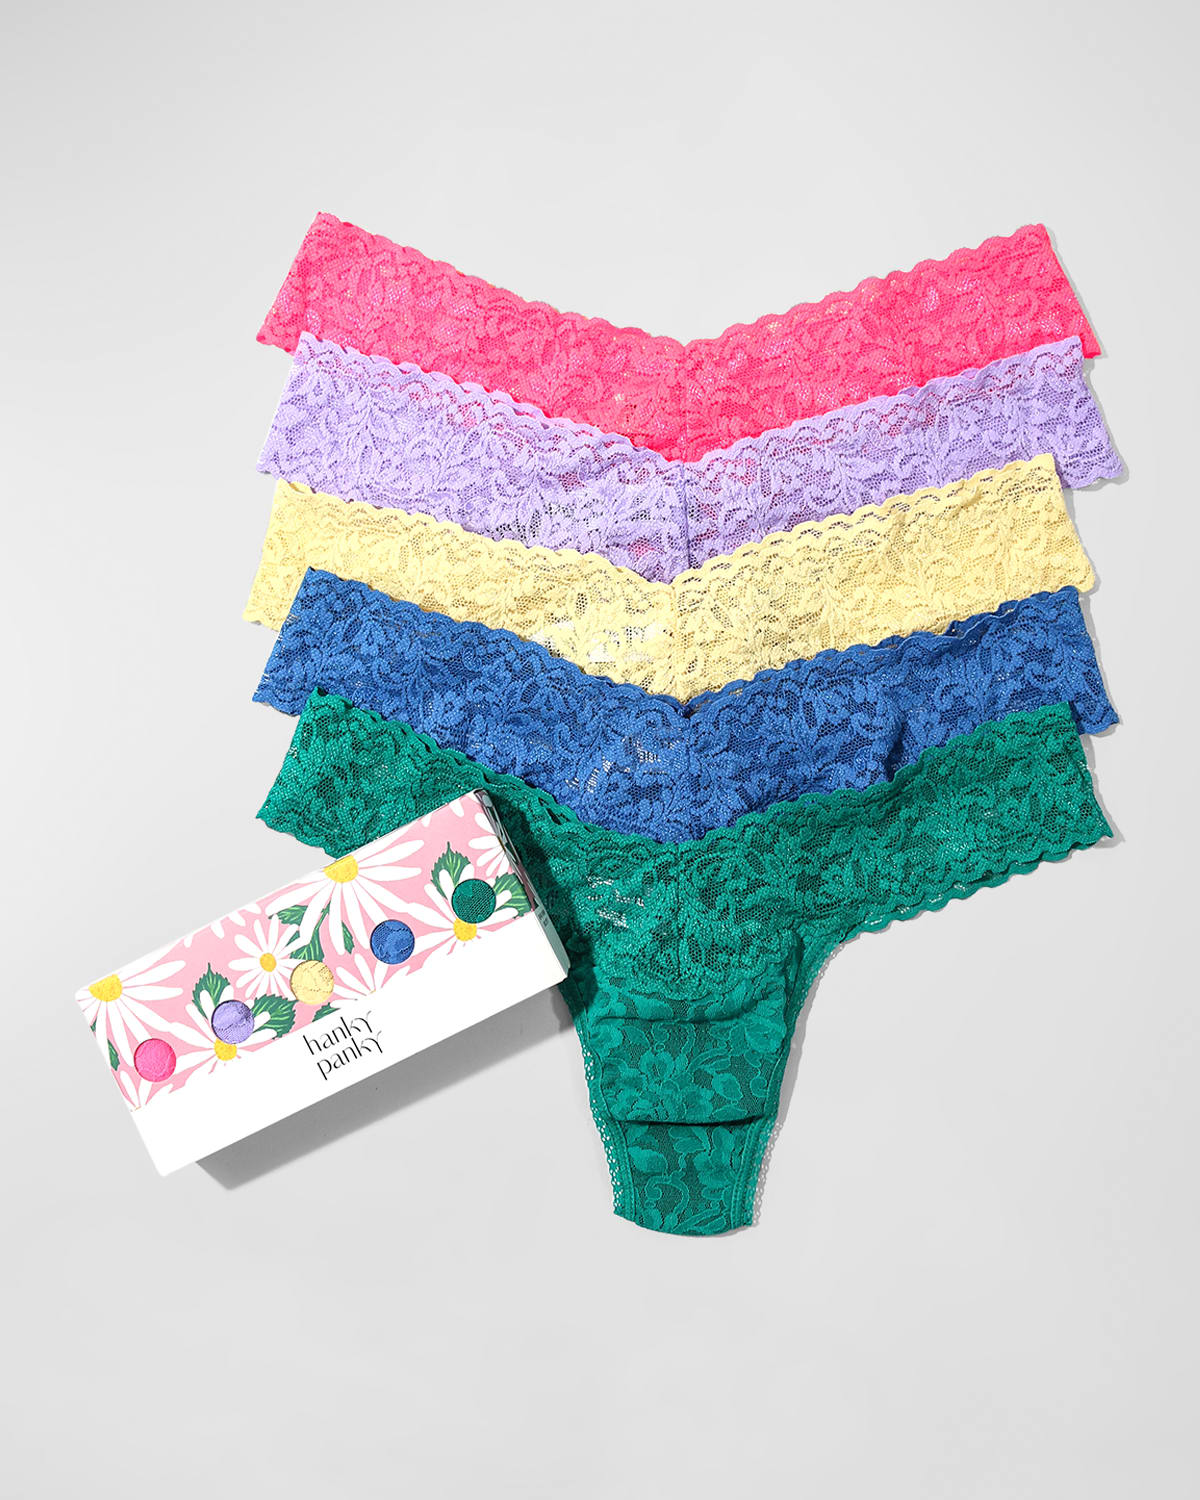 HANKY PANKY 5-PACK LOW-RISE MULTICOLOR LACE THONGS